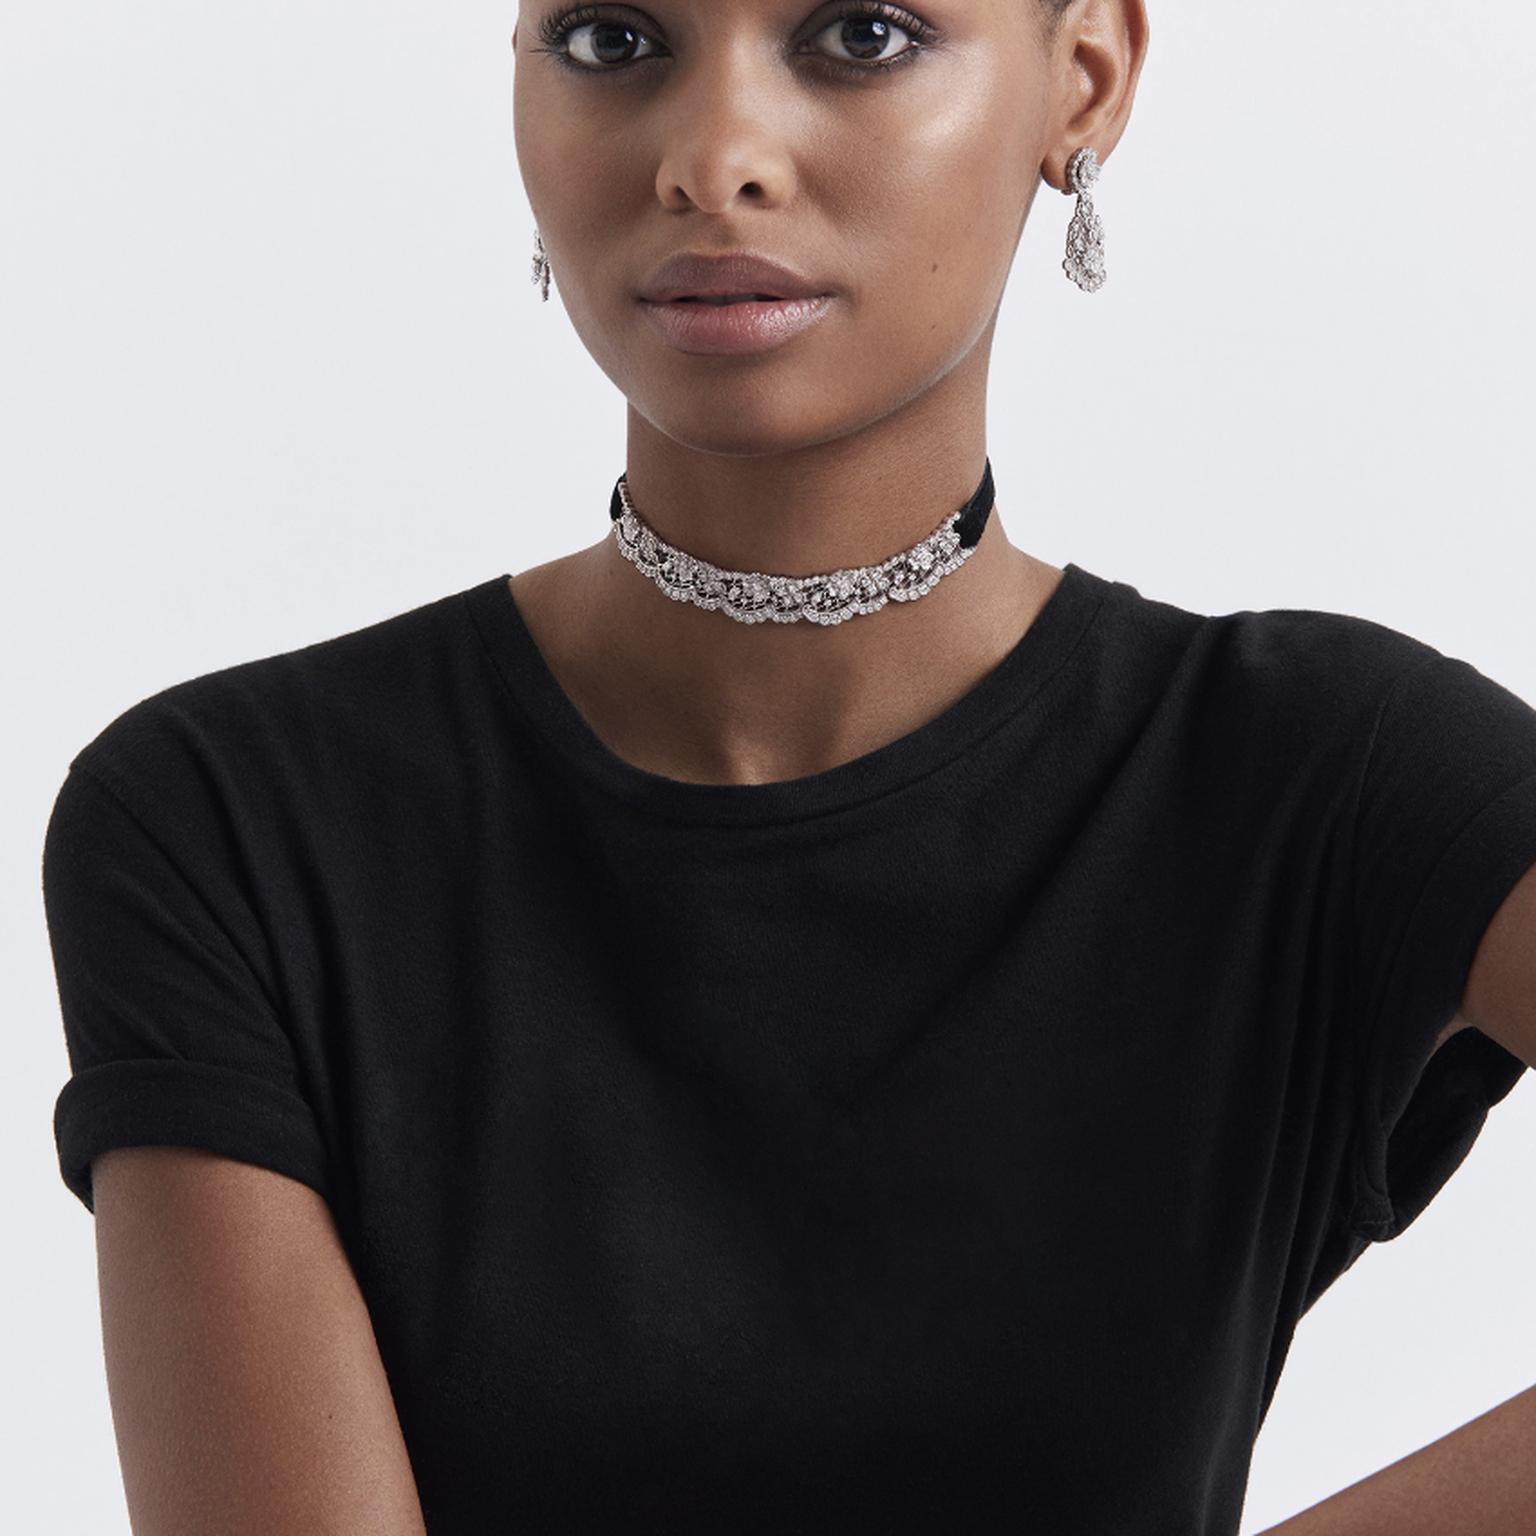 Couture Dior choker by Dior on model